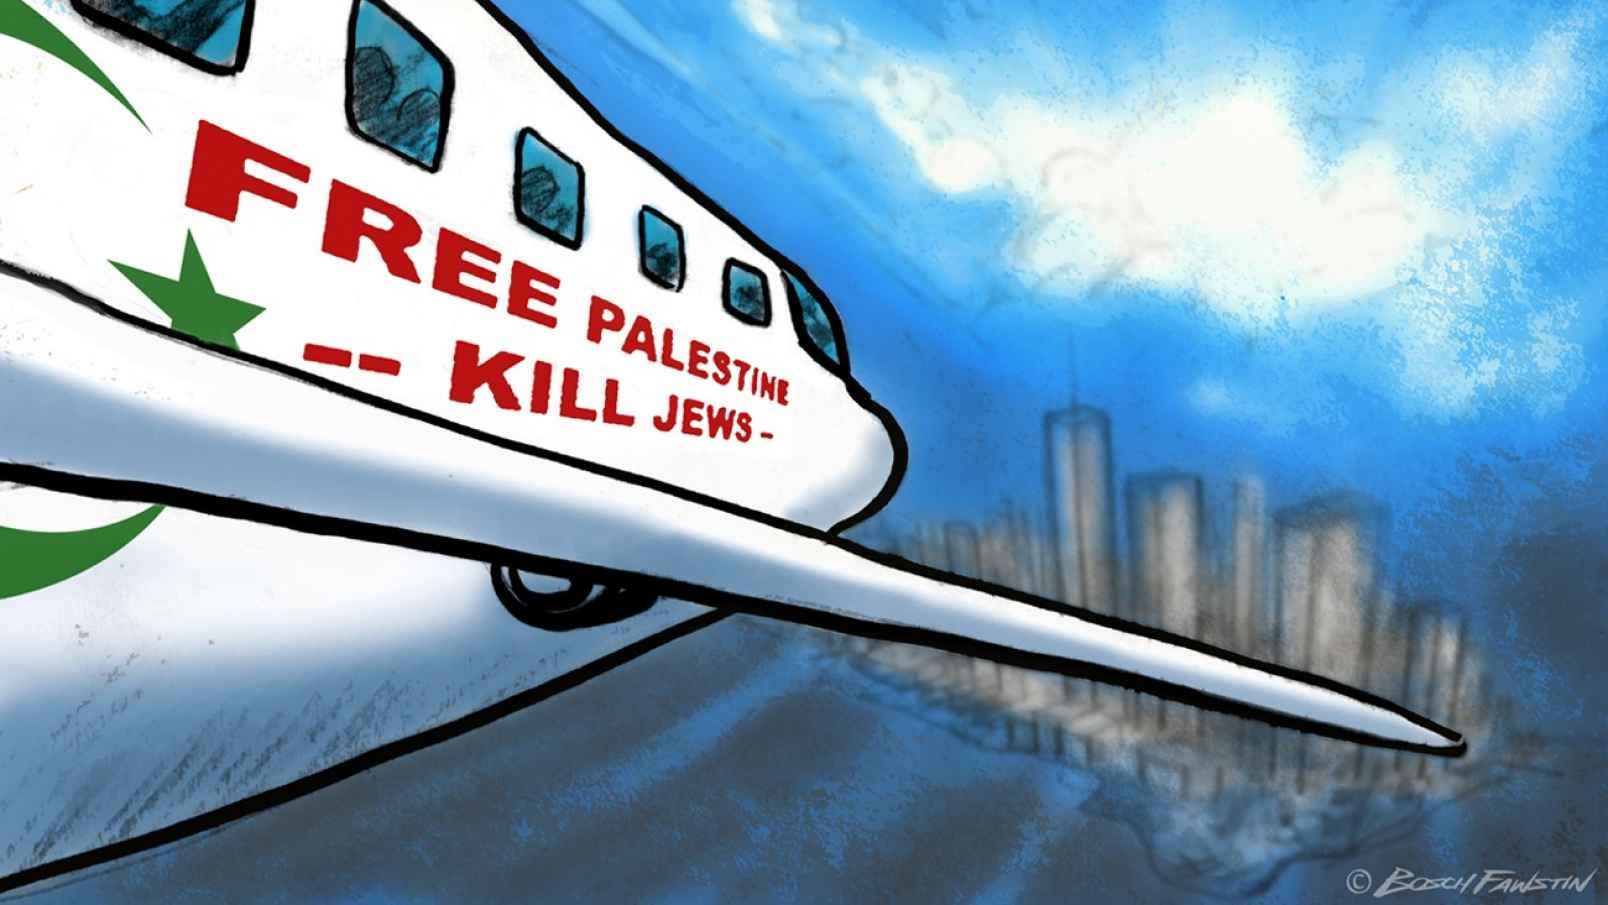 Cartoon plane heading for city with words Free Palestine Kill Jews Cartoon plane heading for city with words Free Palestine Kill Jews